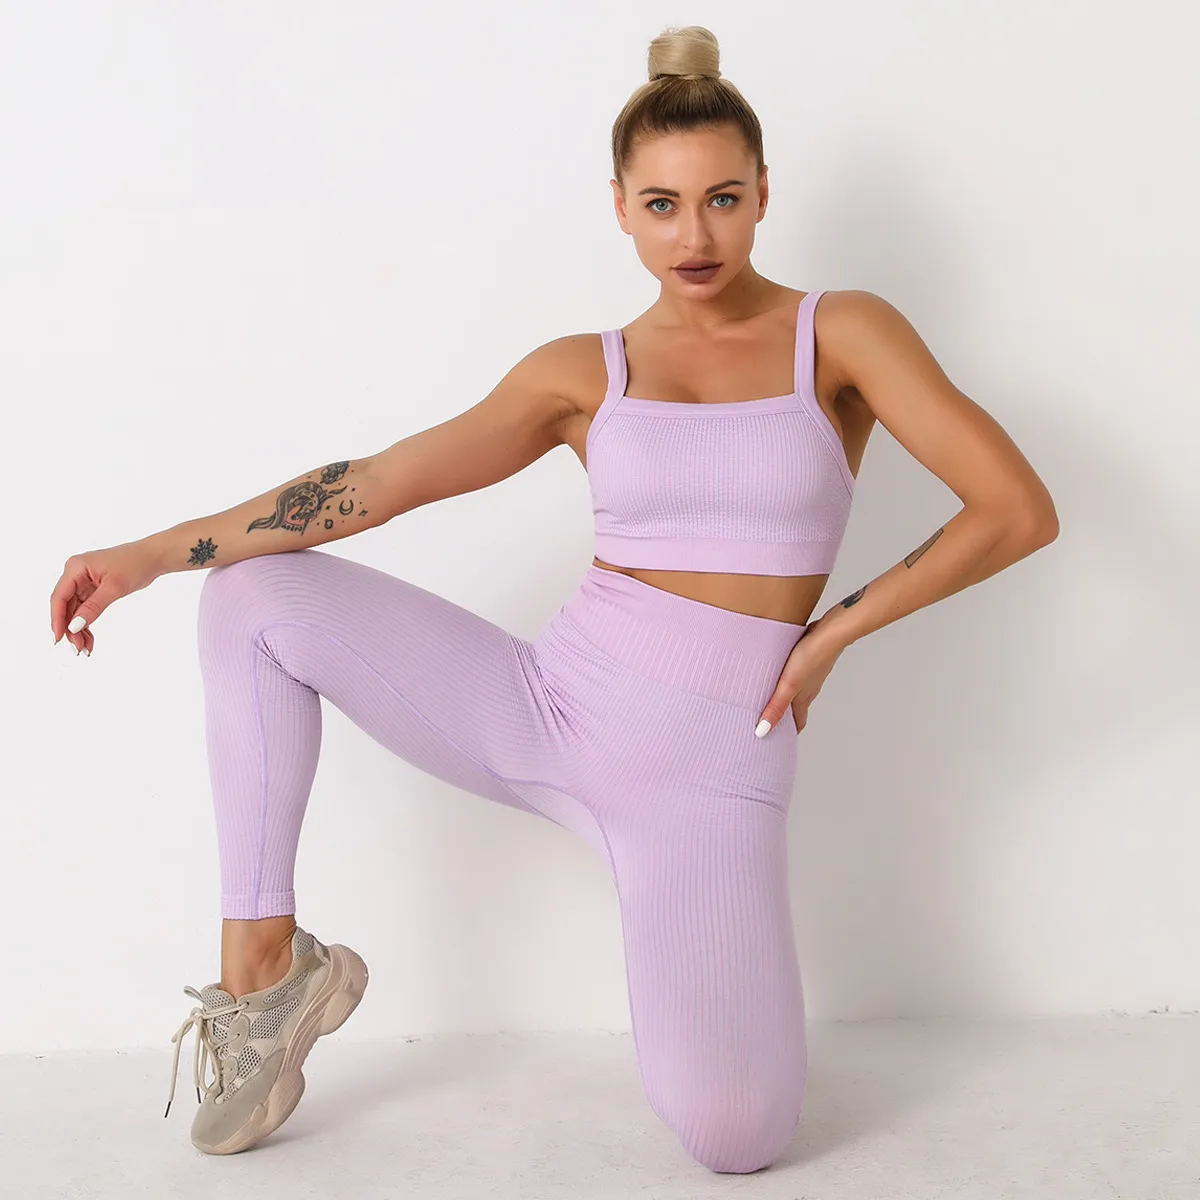 New Style Designer Tracksuit For Women Fitness Align Pant Seamless Workout  Leggings And Tech Fleece Workout Set With Sexy T Shirt For Active Bra Ideal  For Yoga, Gym, And Sports Activities From